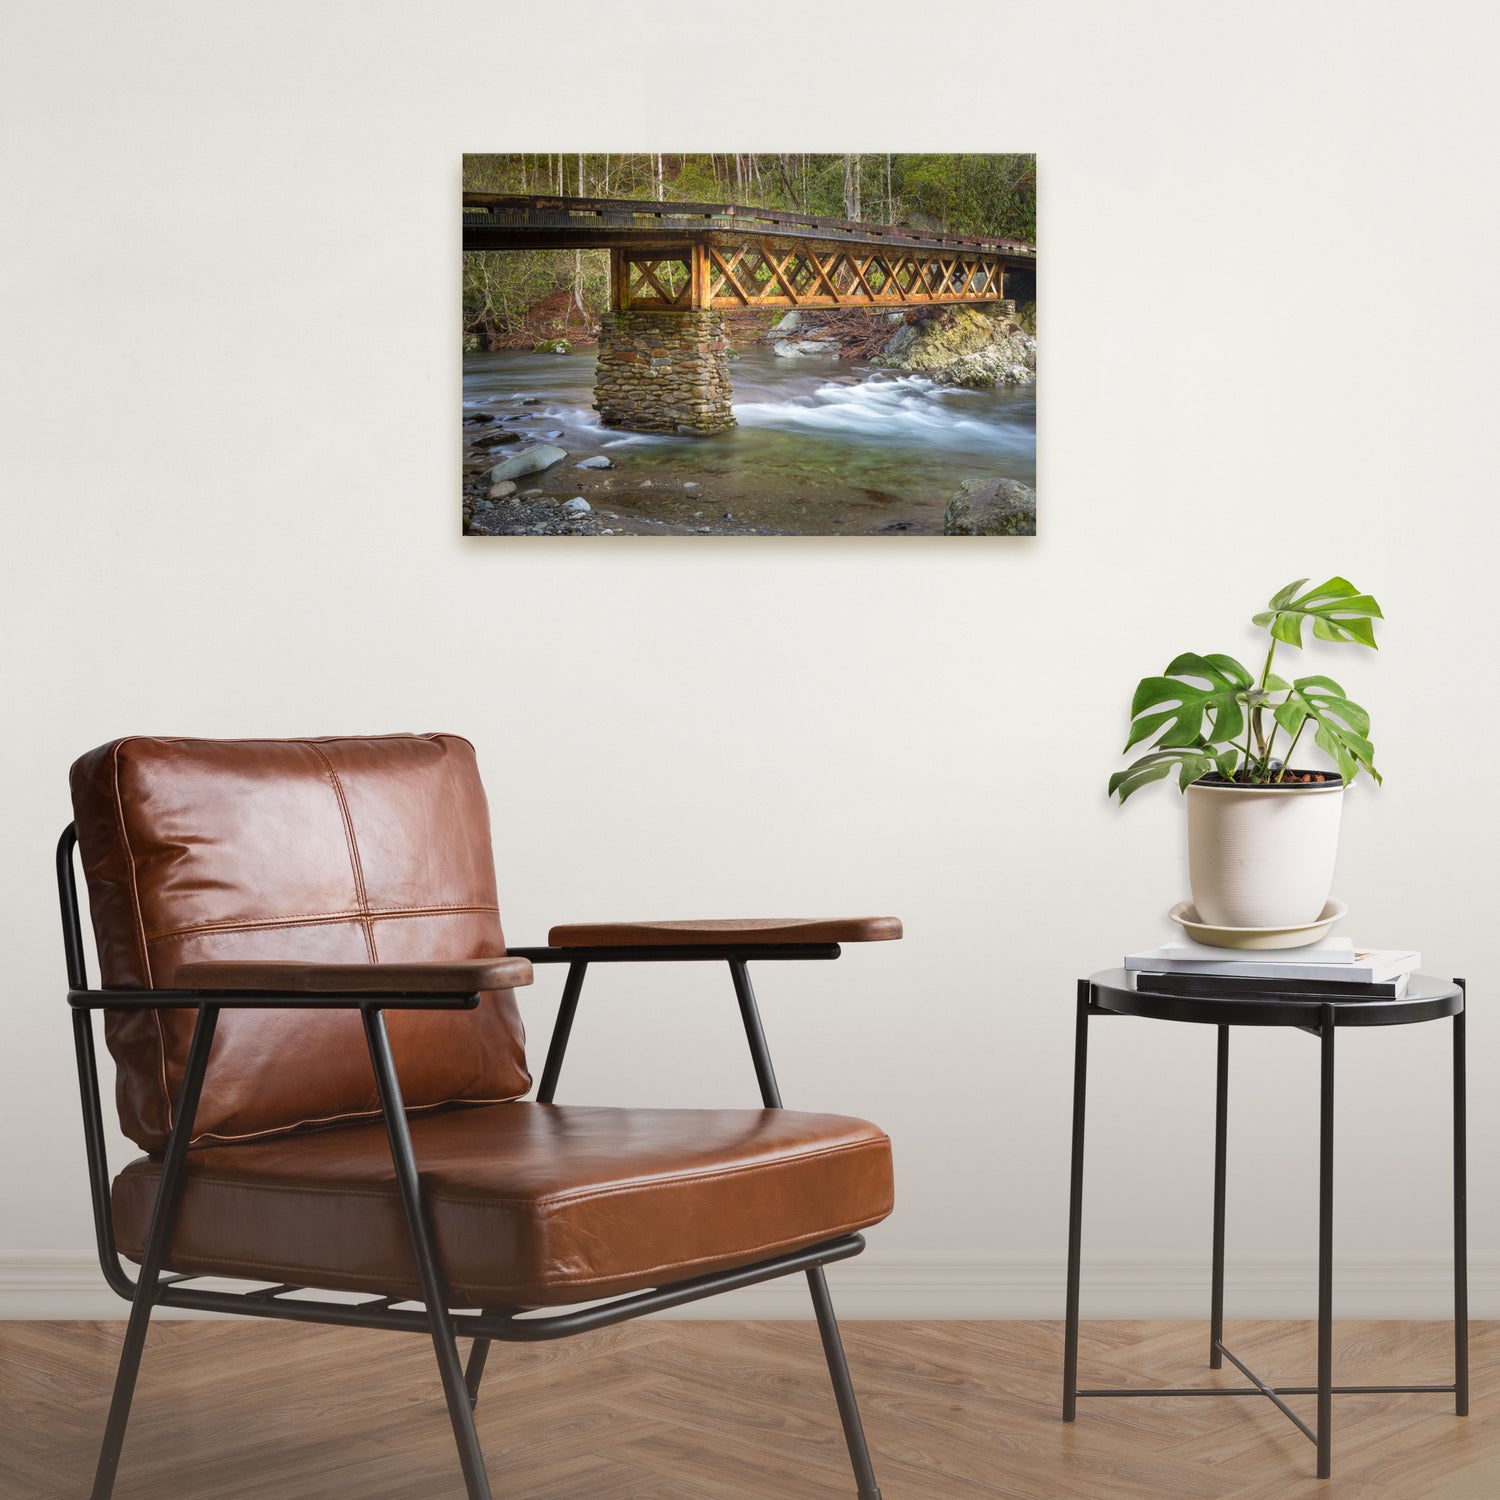 Bridge canvas wall print in the Great Smoky Mountains 